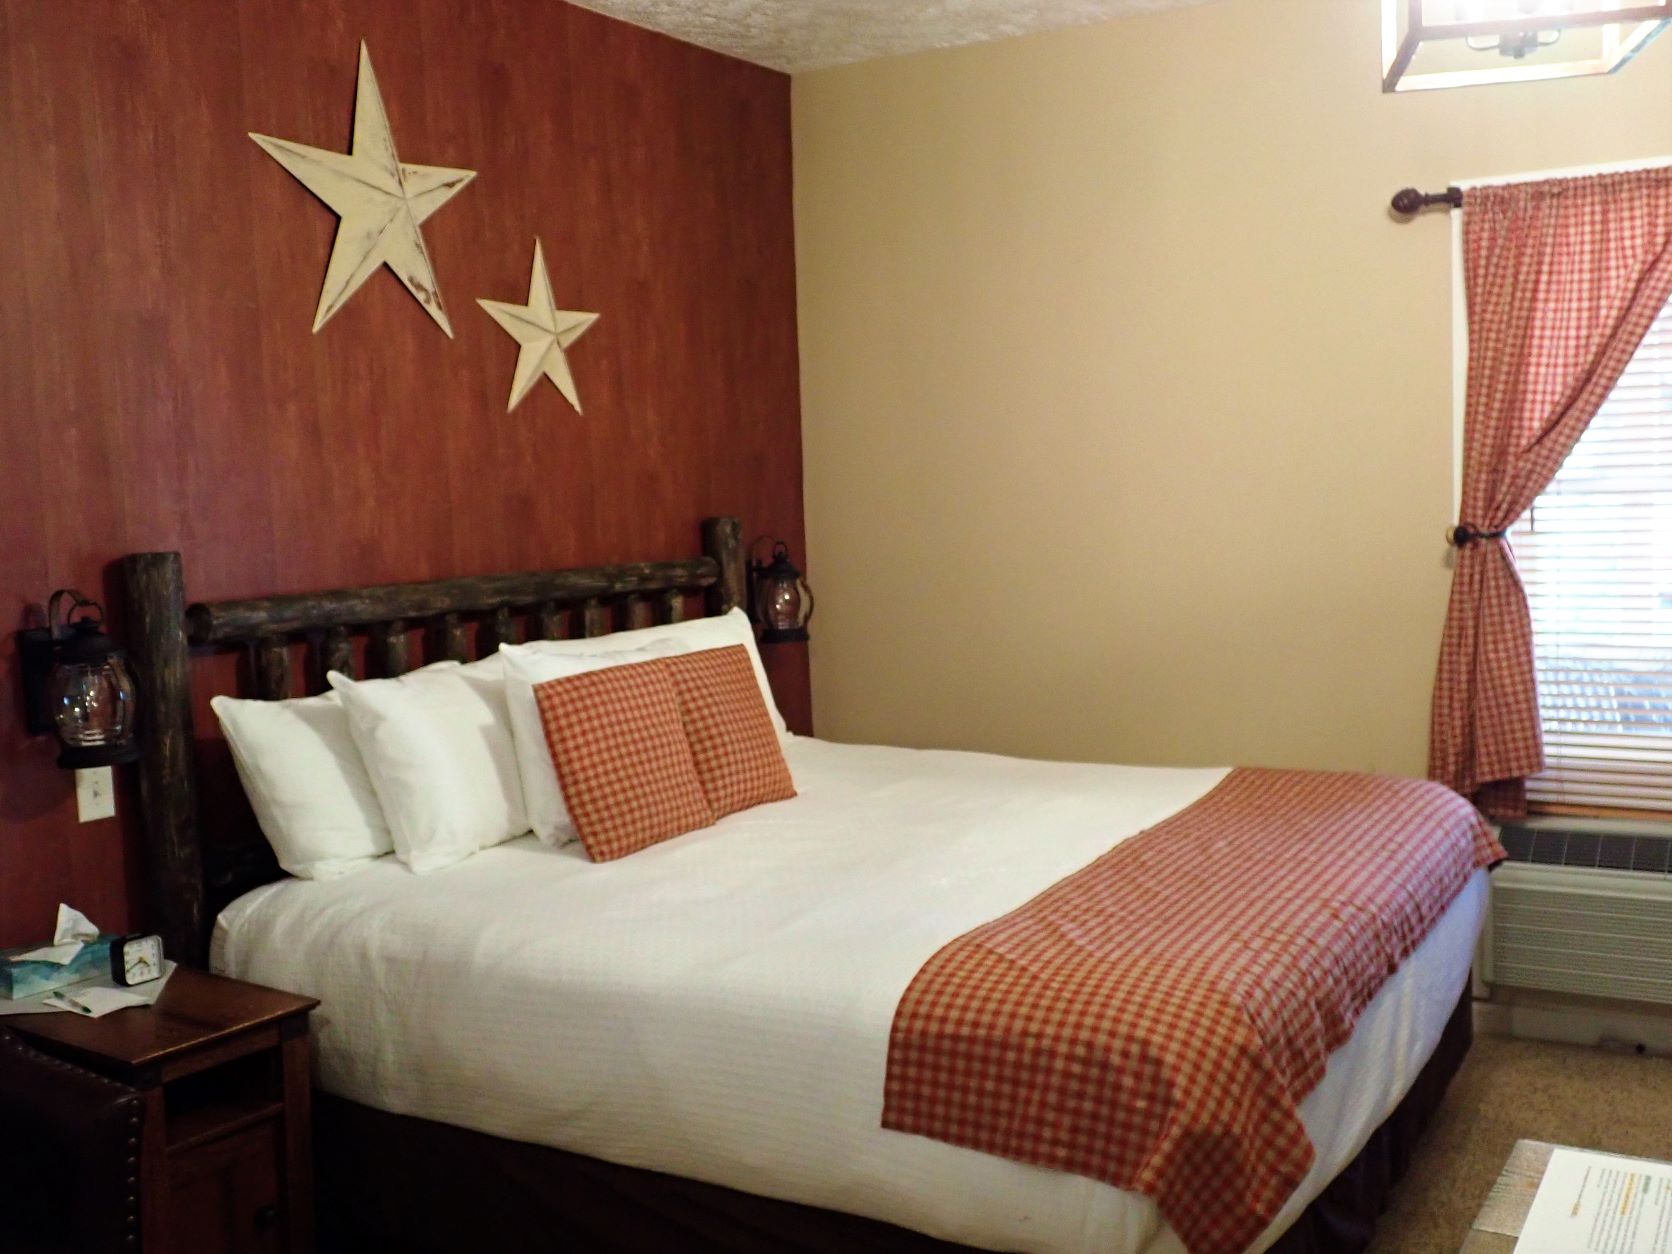 The Barn Room in the Hotel Frankfort boasts a king-sized bed and a jacuzzi tub